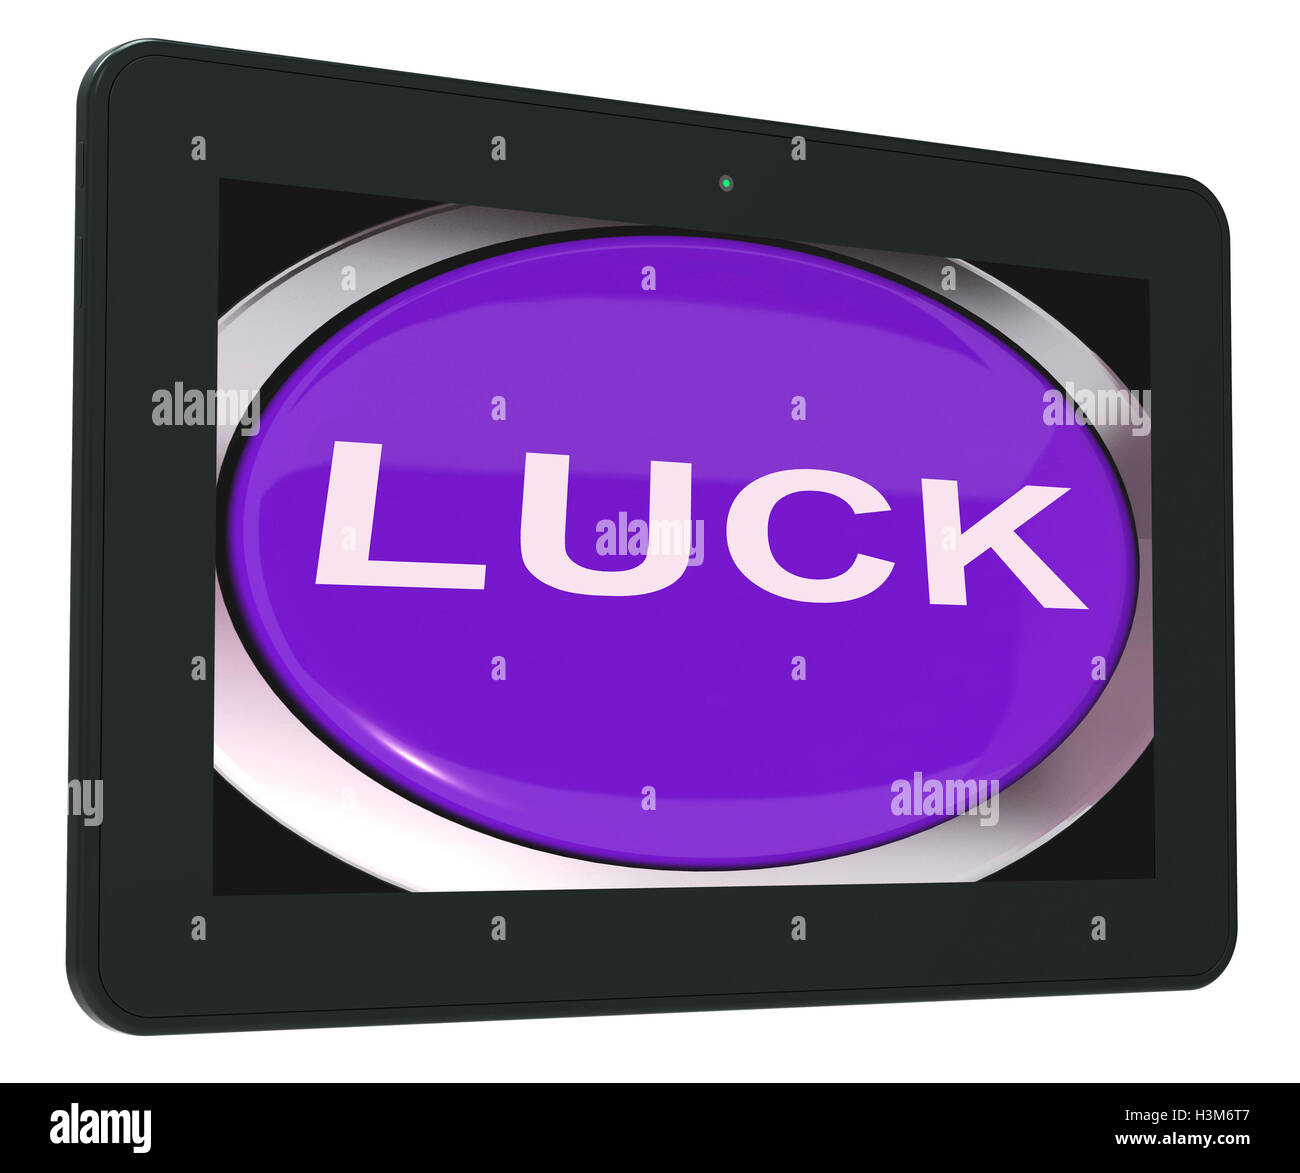 Luck Tablet Shows Lucky Good Fortune Stock Photo